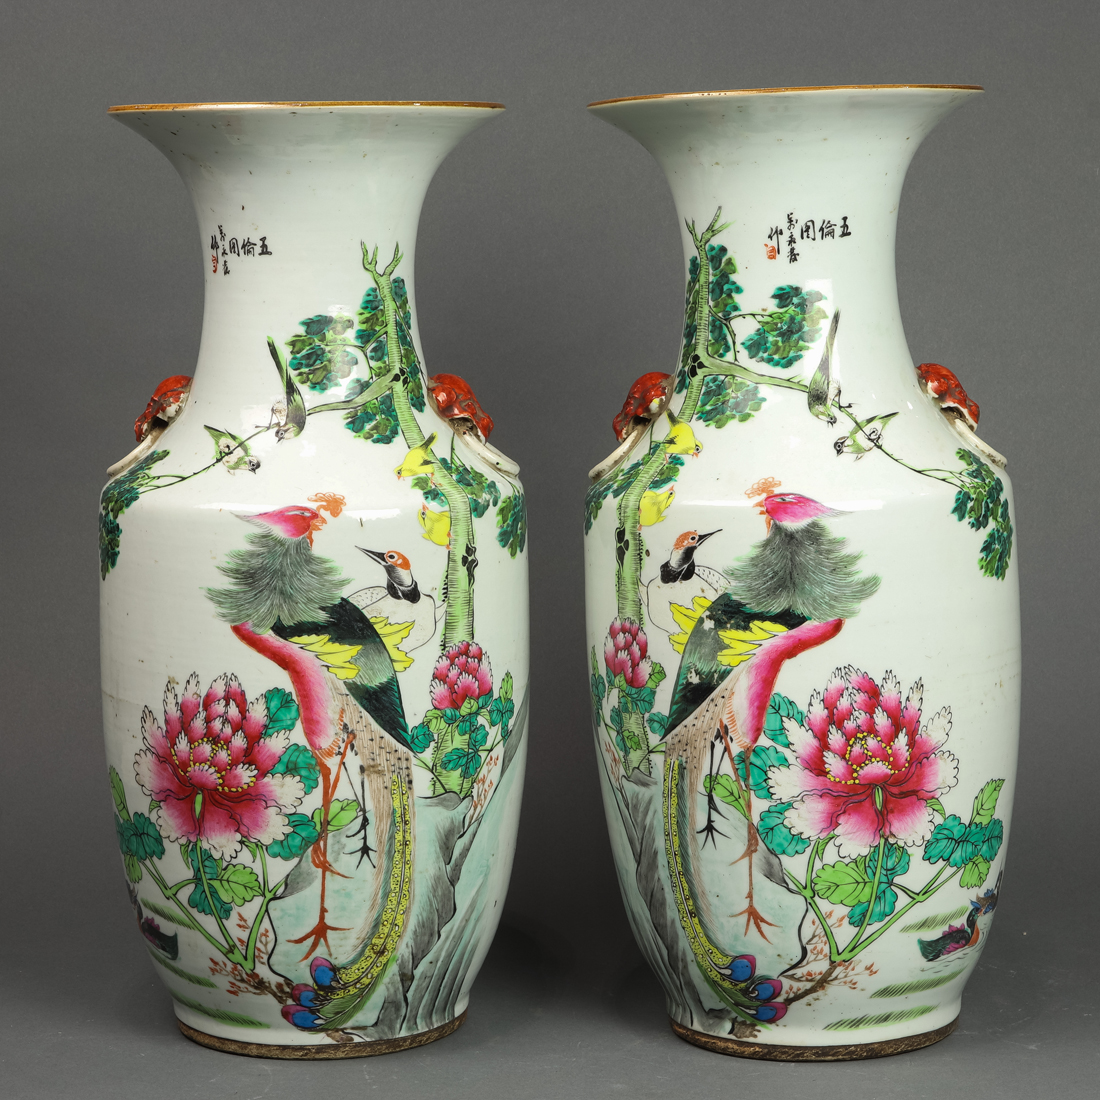 PAIR OF CHINESE FAMILLE ROSE VASES 3a3a48